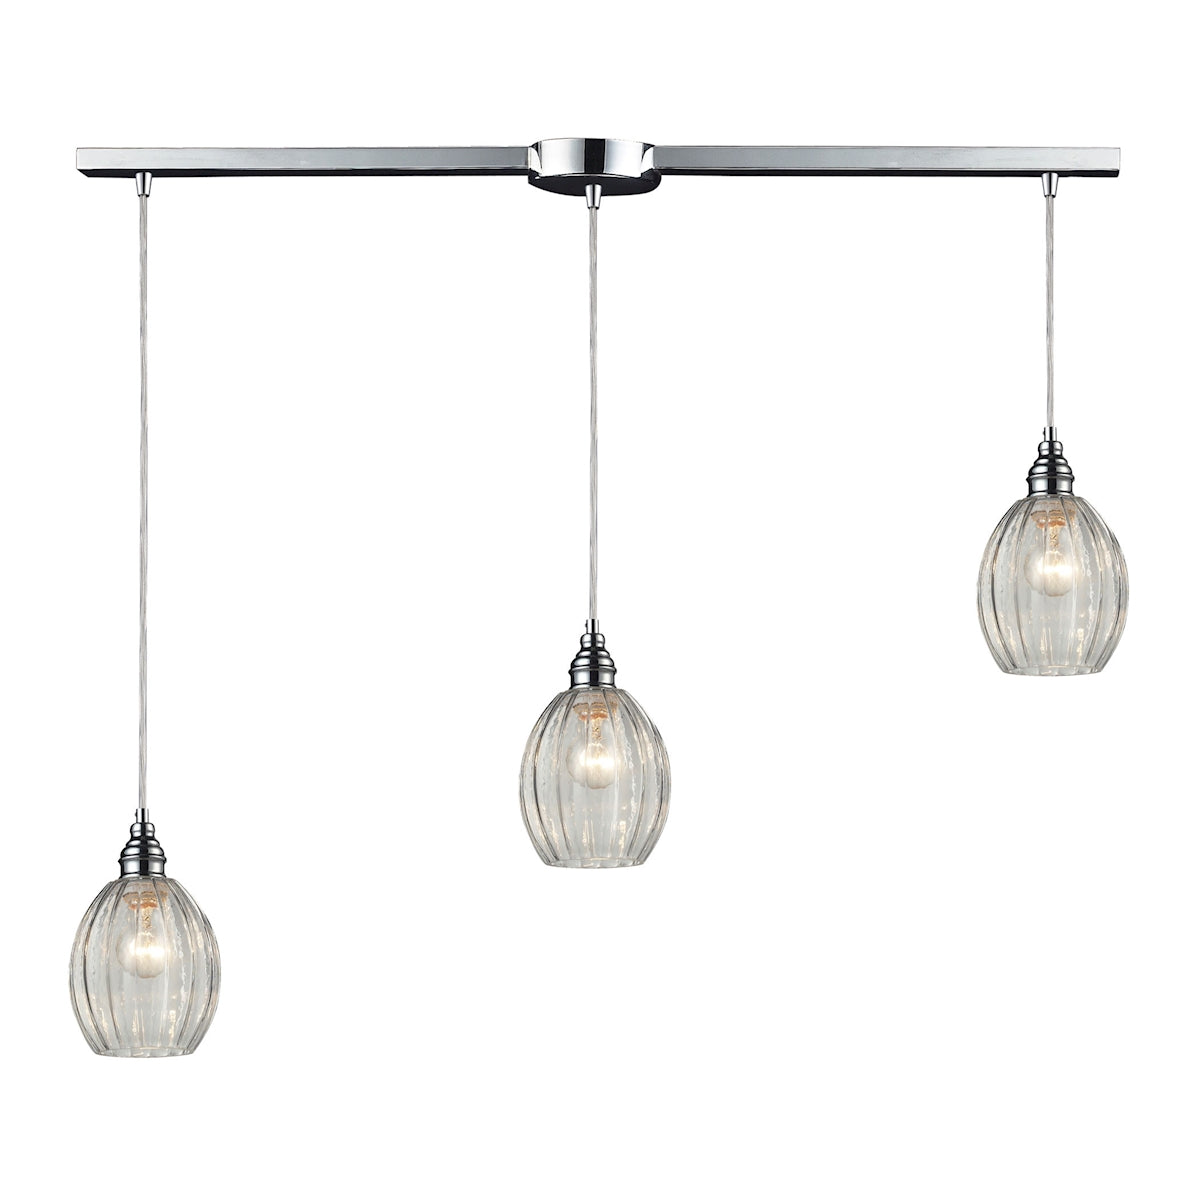 ELK Lighting 46017/3L Danica 3-Light Linear Pendant Fixture in Polished Chrome with Clear Glass